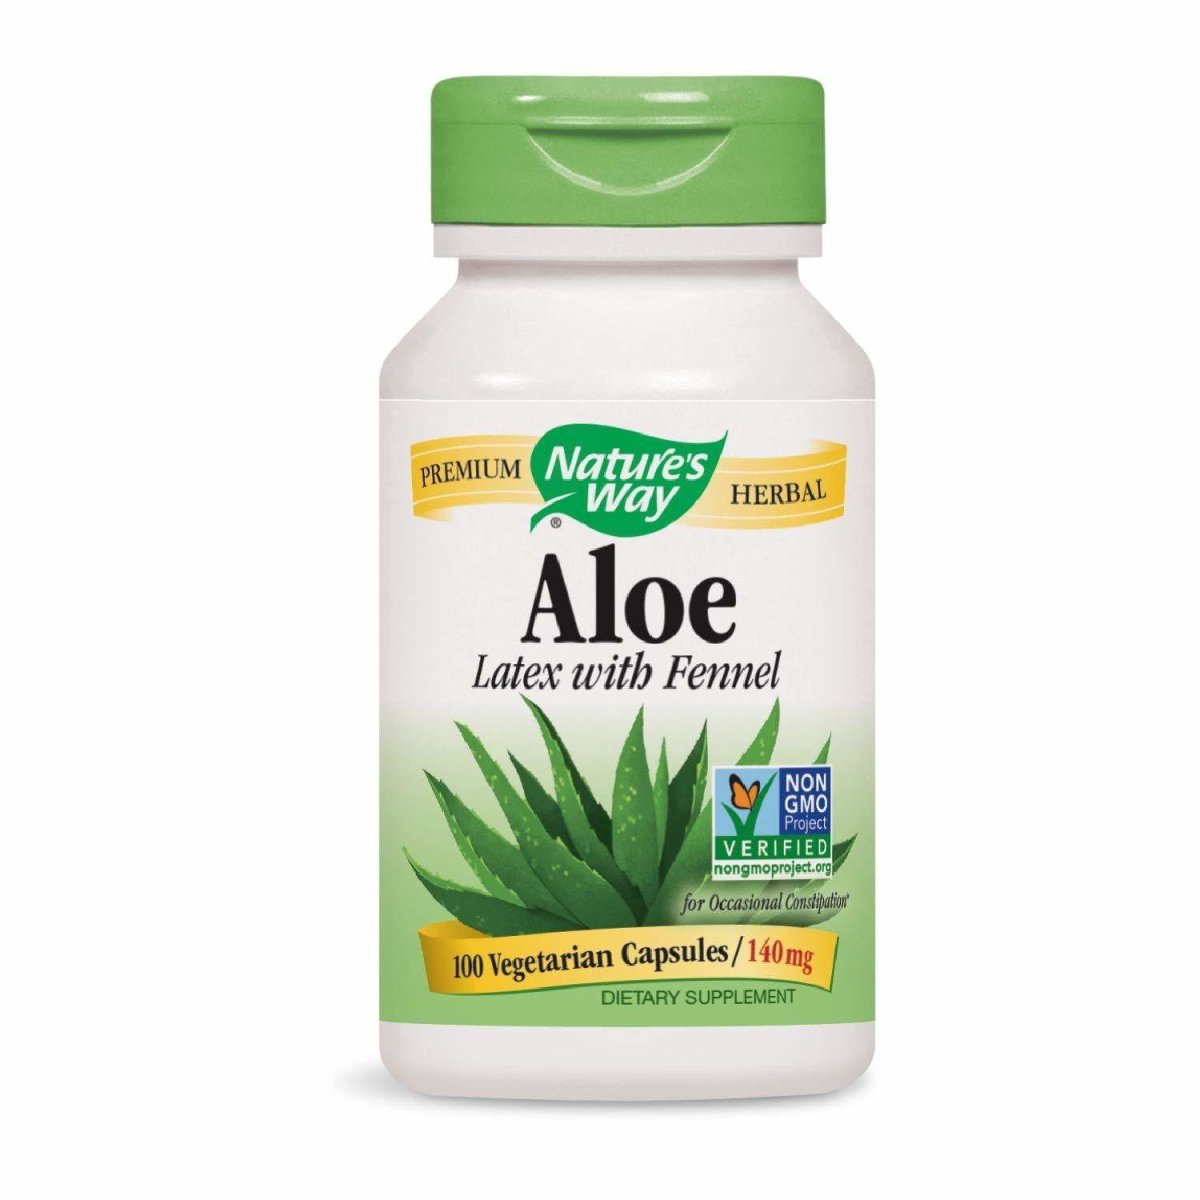 Natures Way - Aloe Latex with Fennel - 100 Capsules